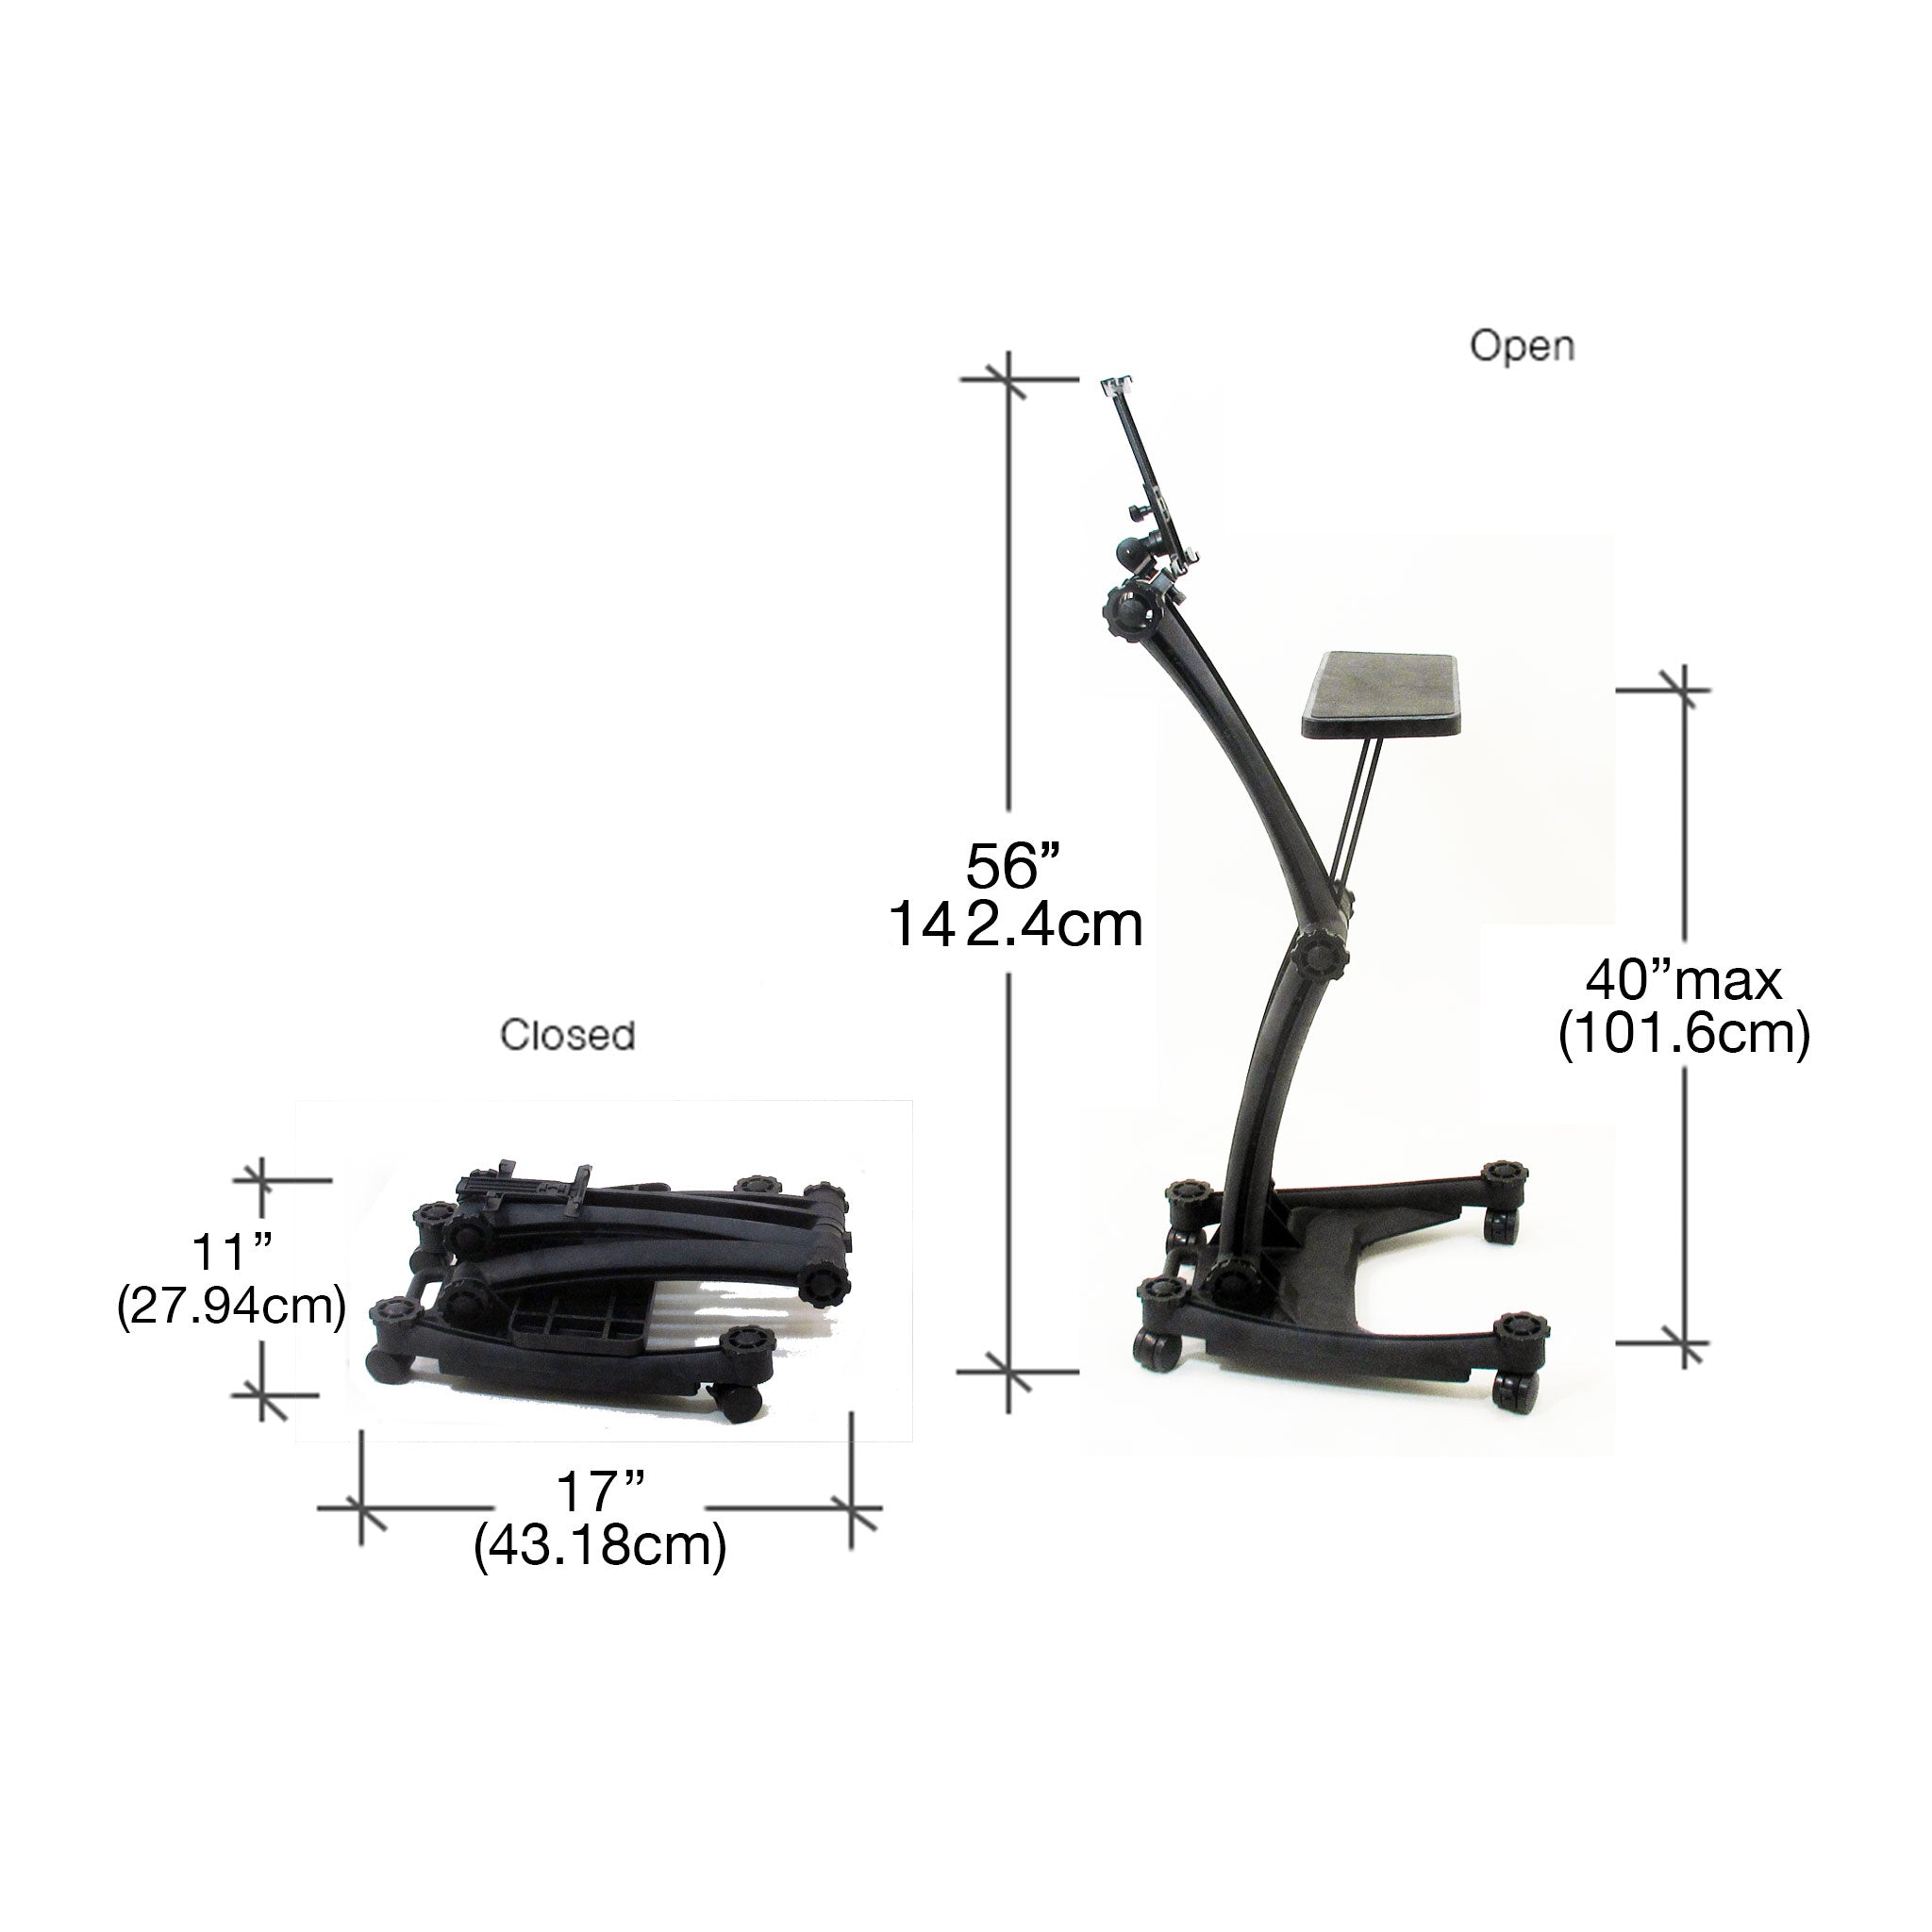 Dimensions of the ZStand Sportster Pro in its closed and full extension positions.